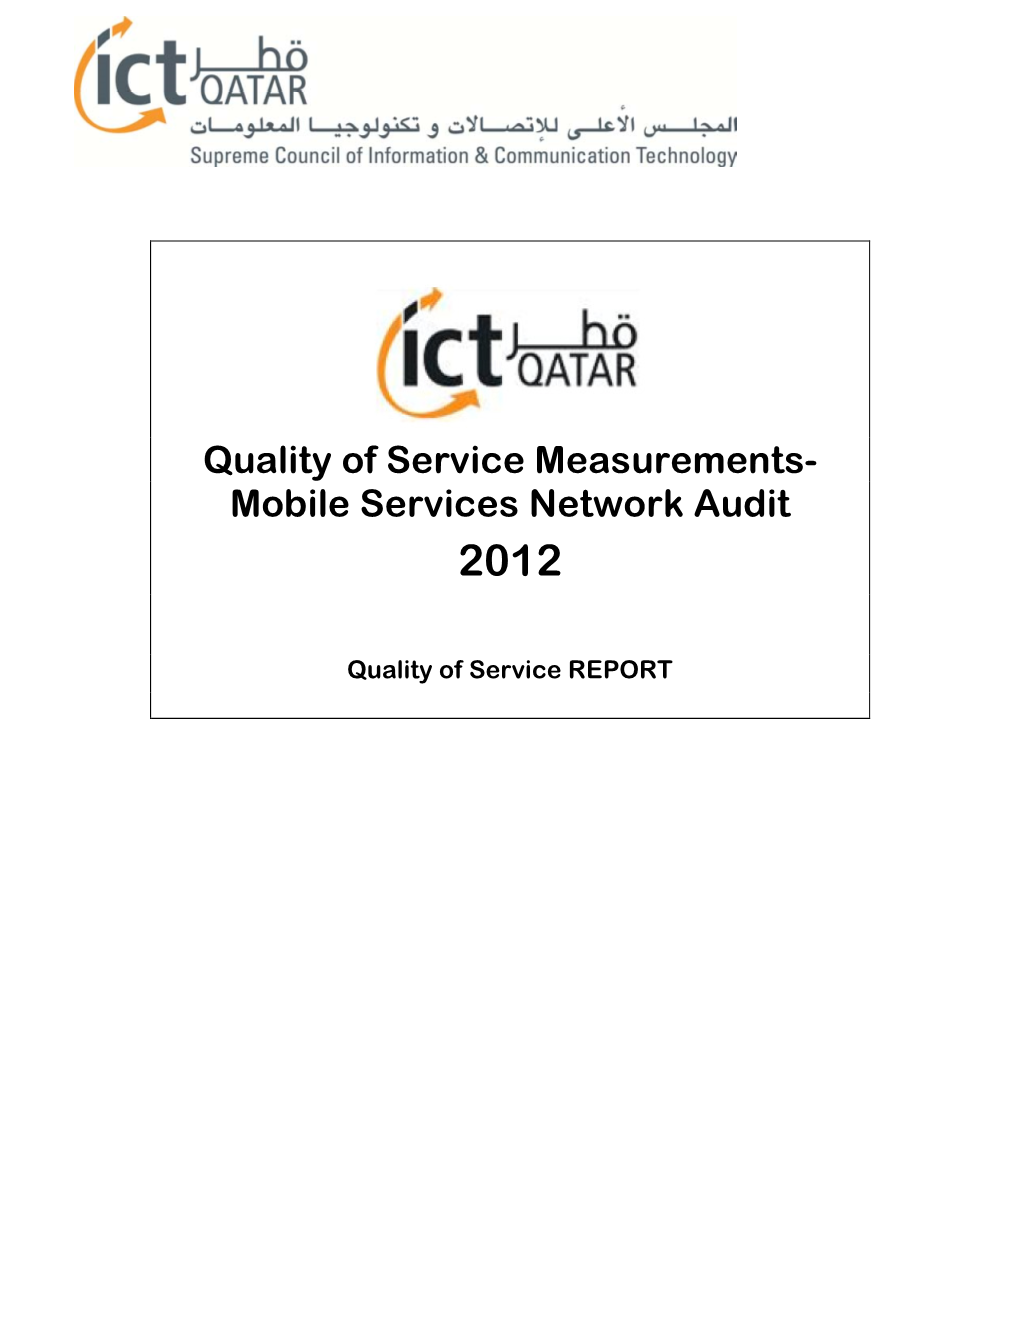 Quality of Service Measurements- Mobile Services Network Audit 2012